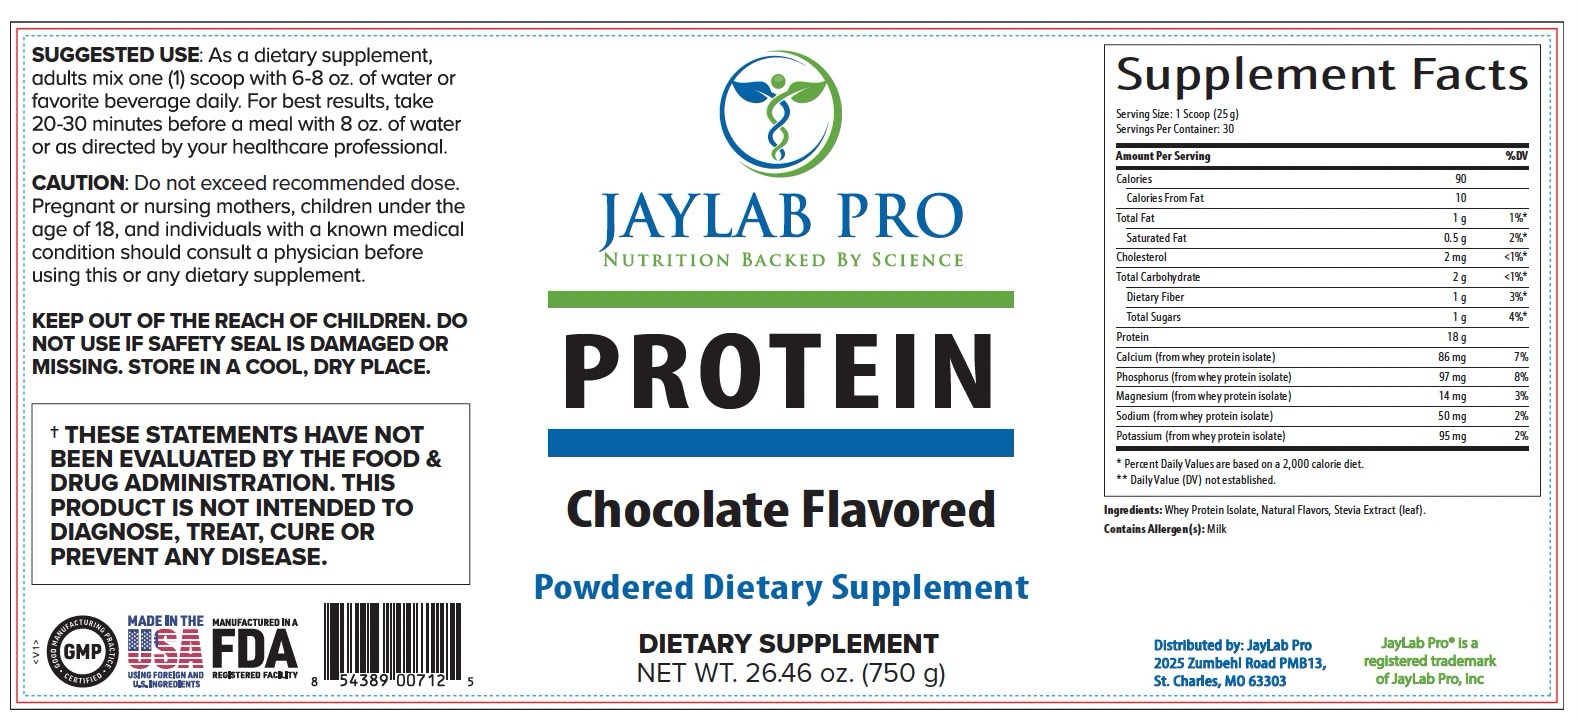 Product Label Image